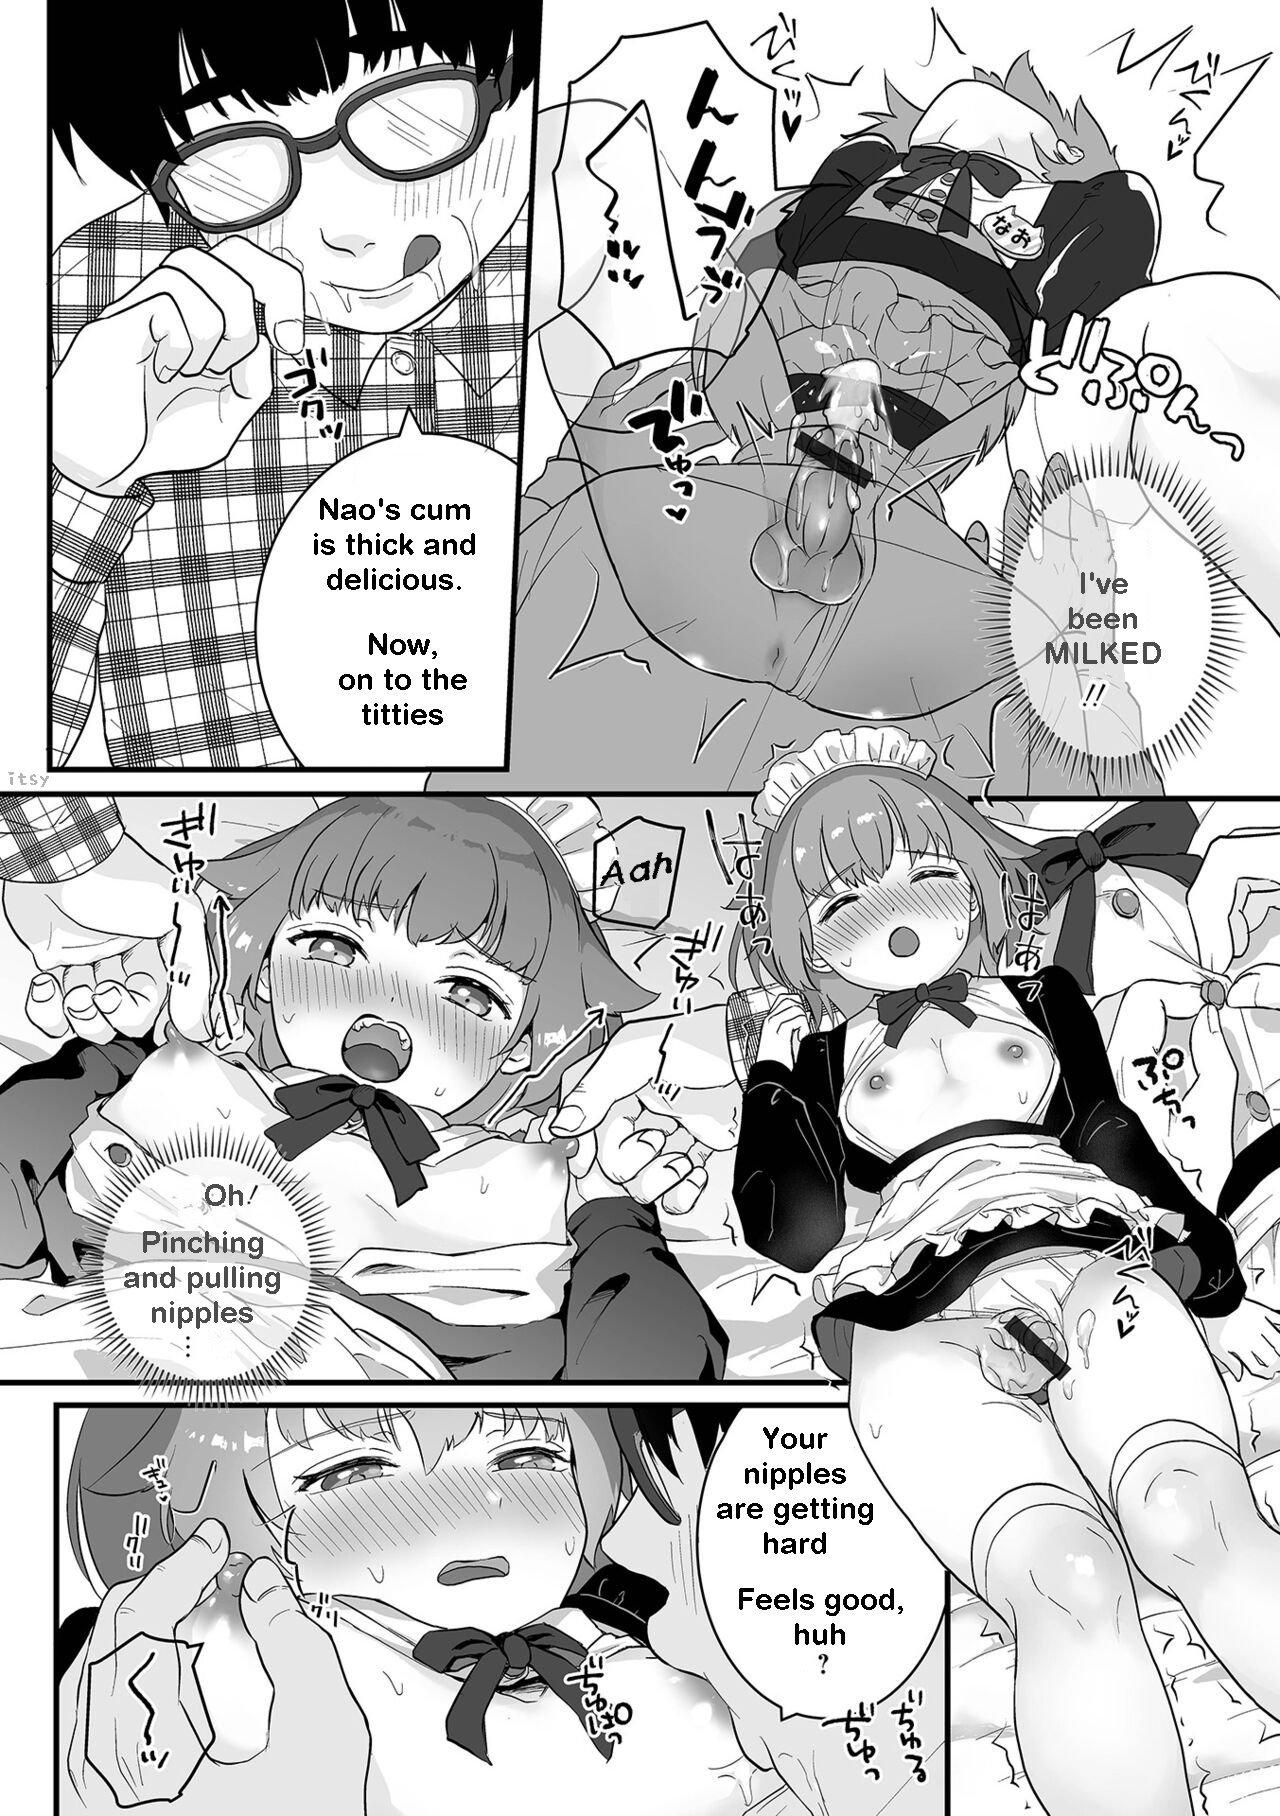 Hot Cunt Shinmai Maid Hajimete no Okyuuji | New Maid's first time Lover - Page 6